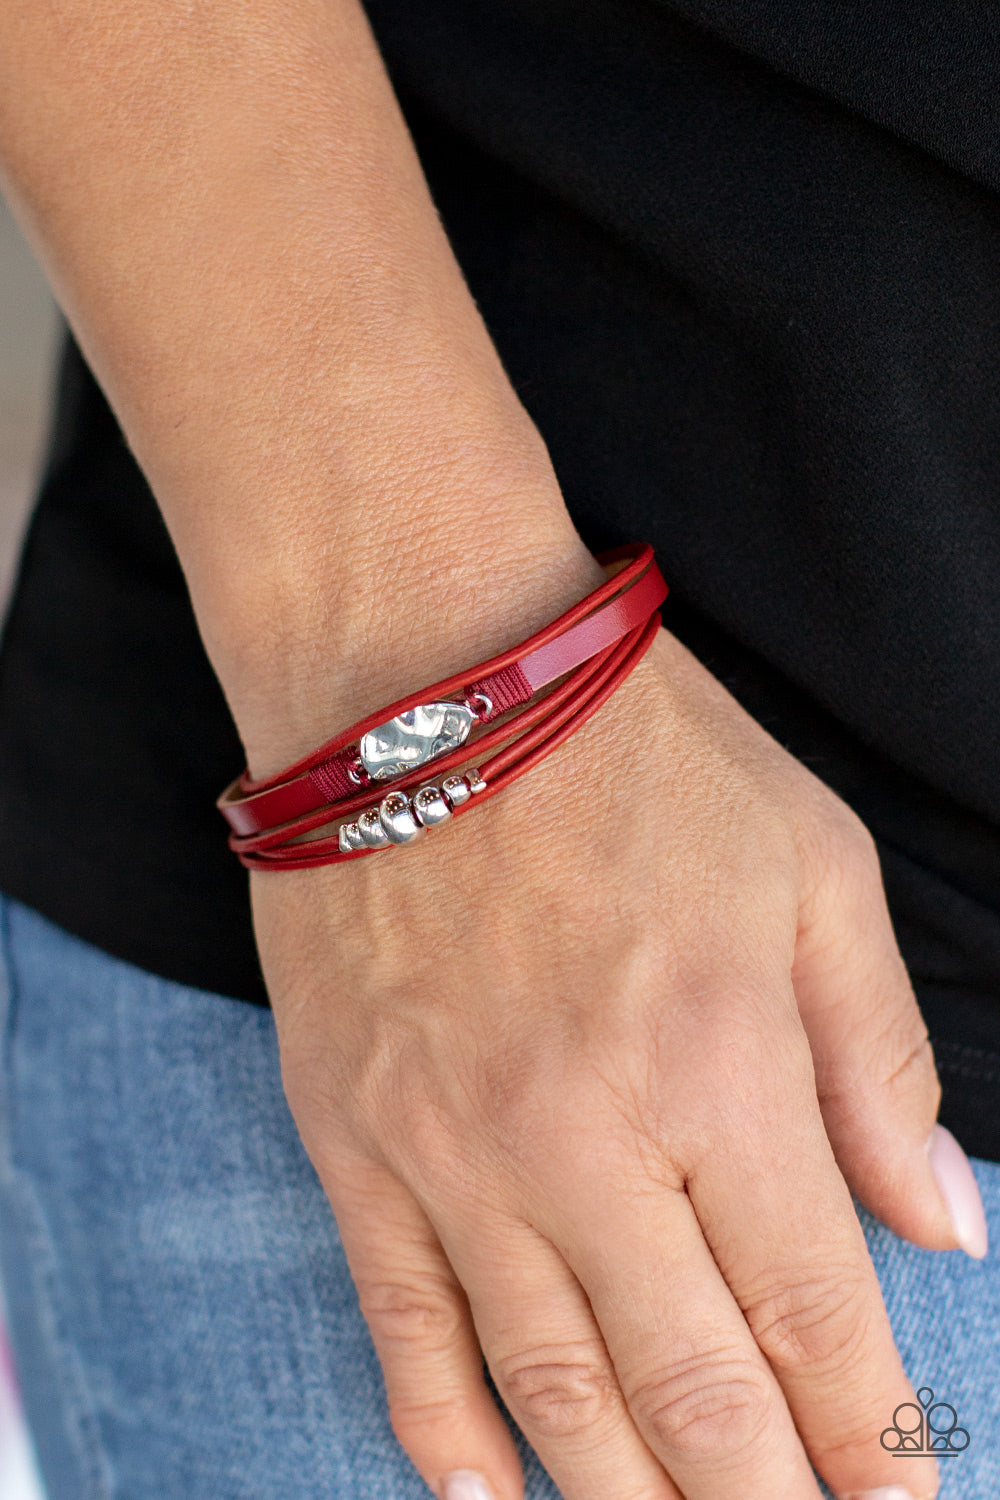 Tahoe Tourist - Red bracelet (2021 FALL "PREVIEW") Success